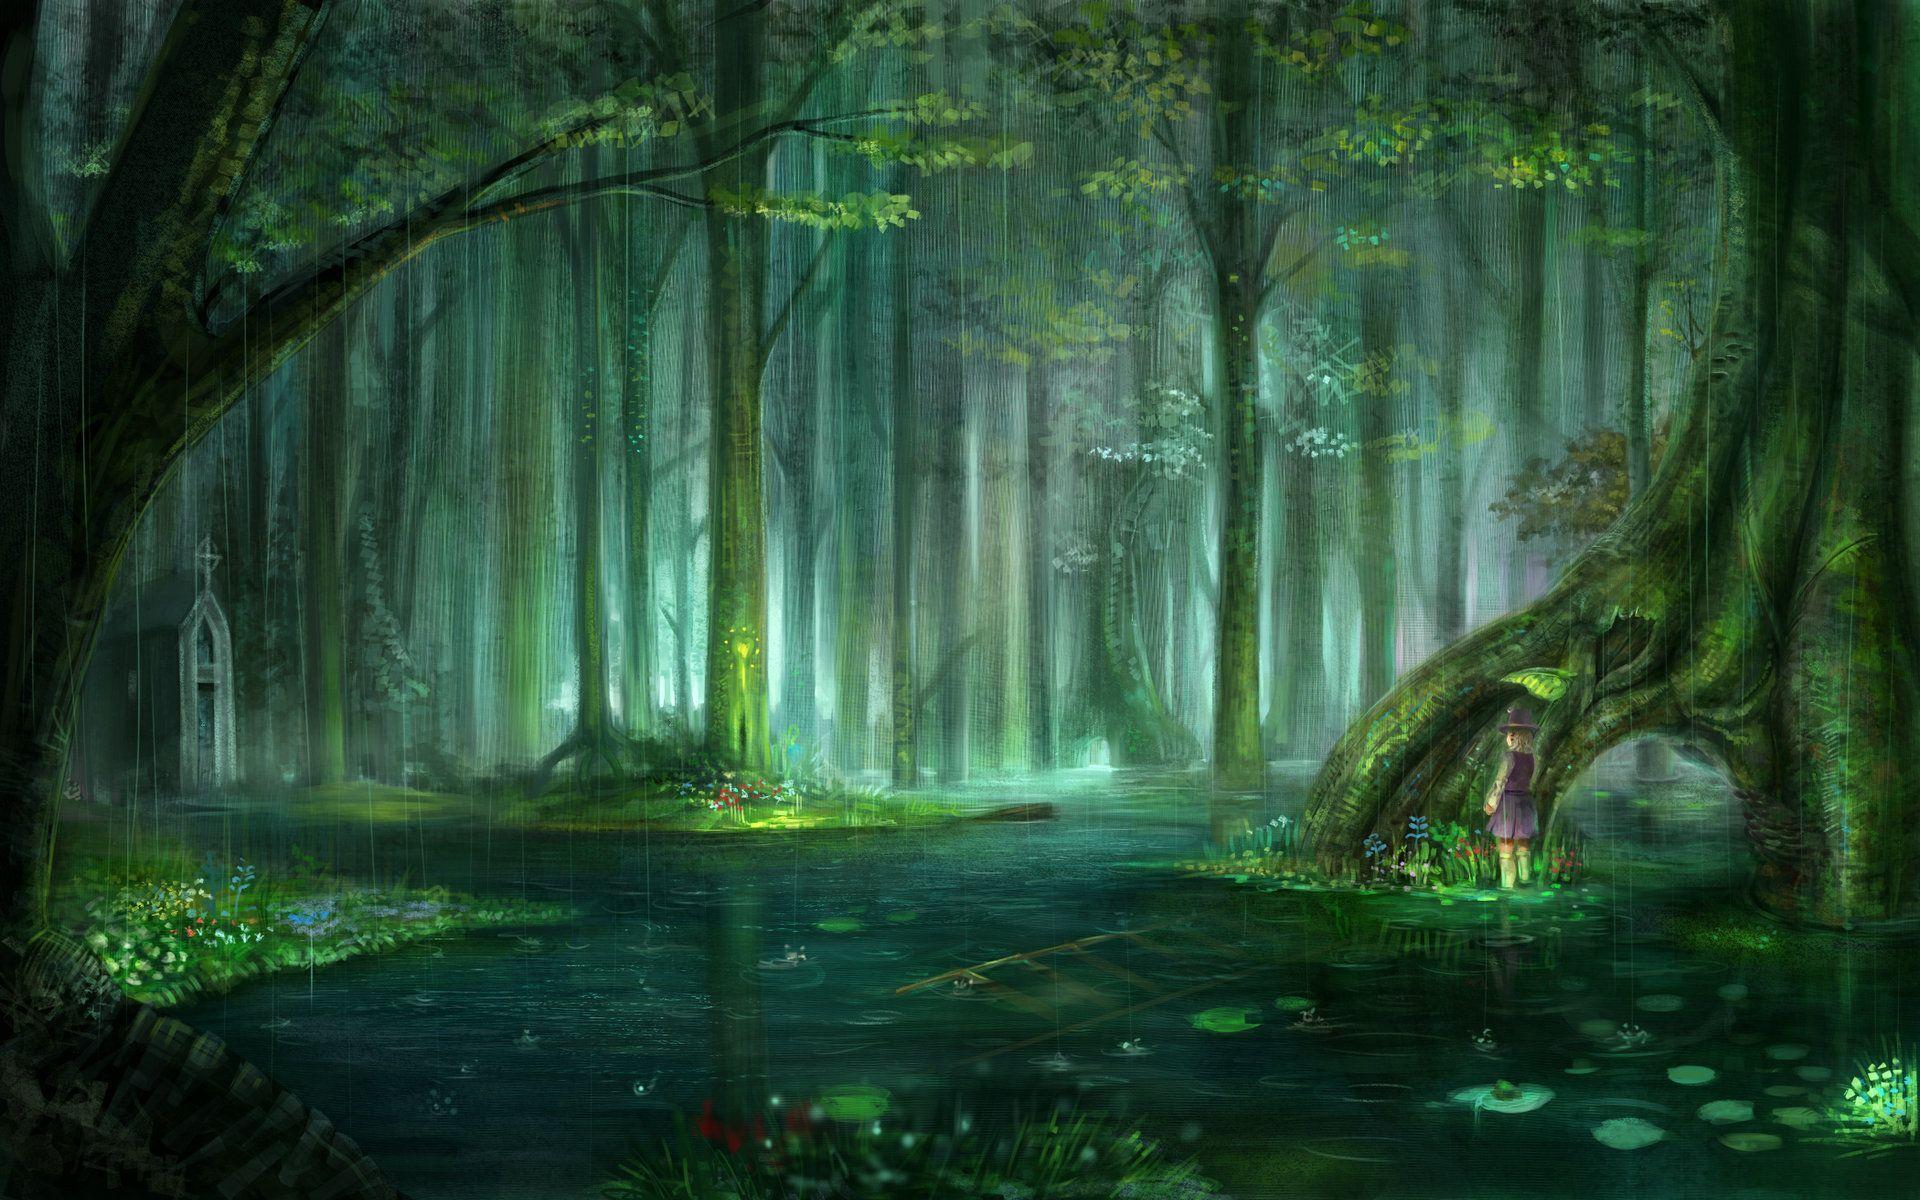 Mythical Forest Wallpapers Top Free Mythical Forest Backgrounds Wallpaperaccess Search free dark wallpapers on zedge and personalize your phone to suit you. mythical forest wallpapers top free